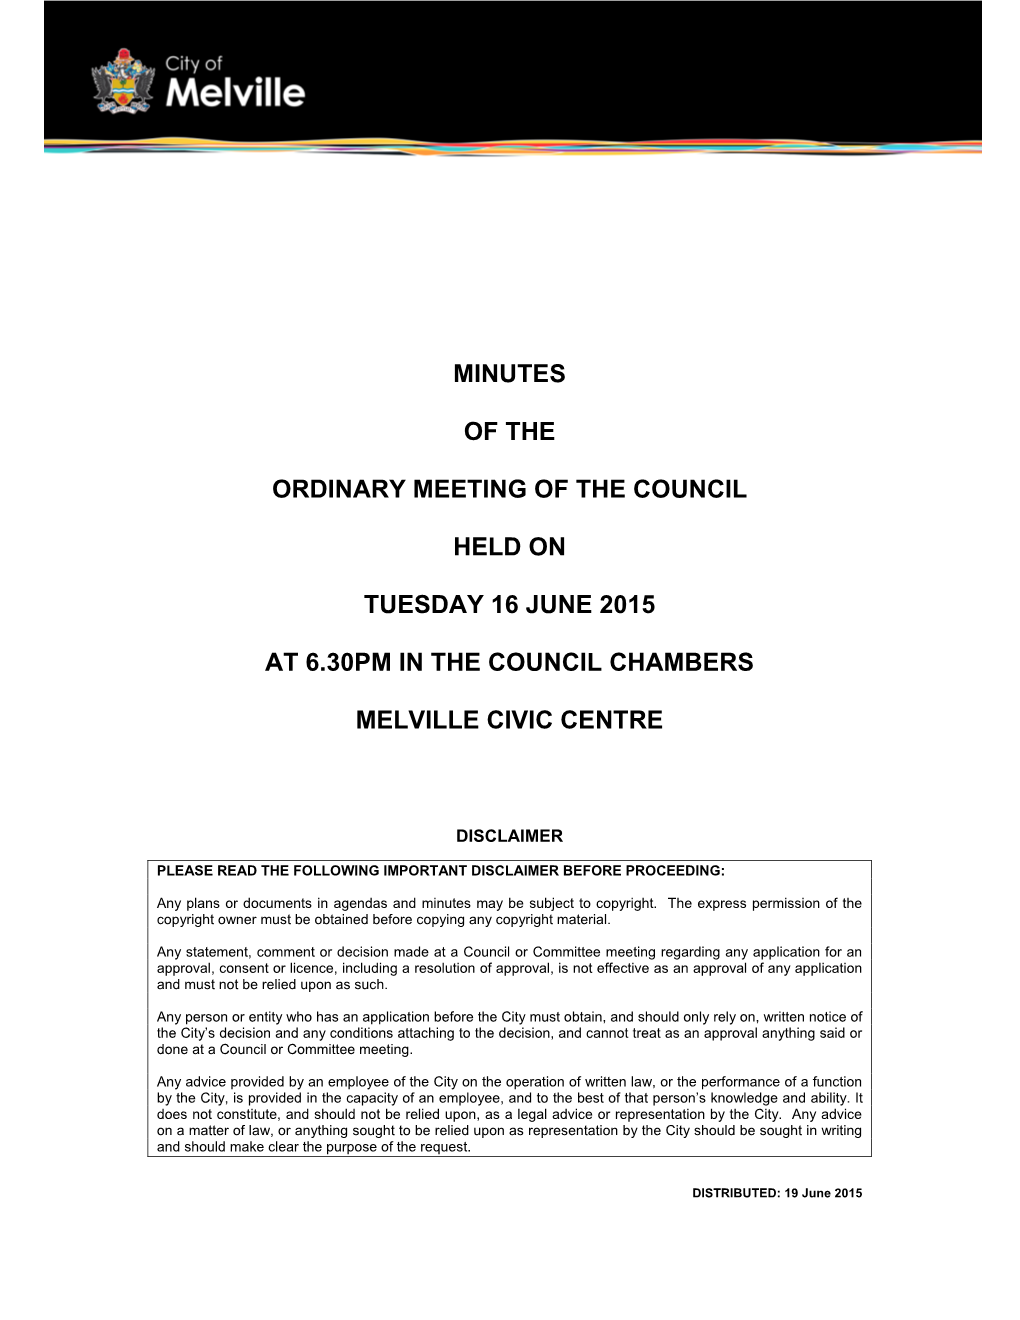 Minutes of the Ordinary Meeting of the Council Held